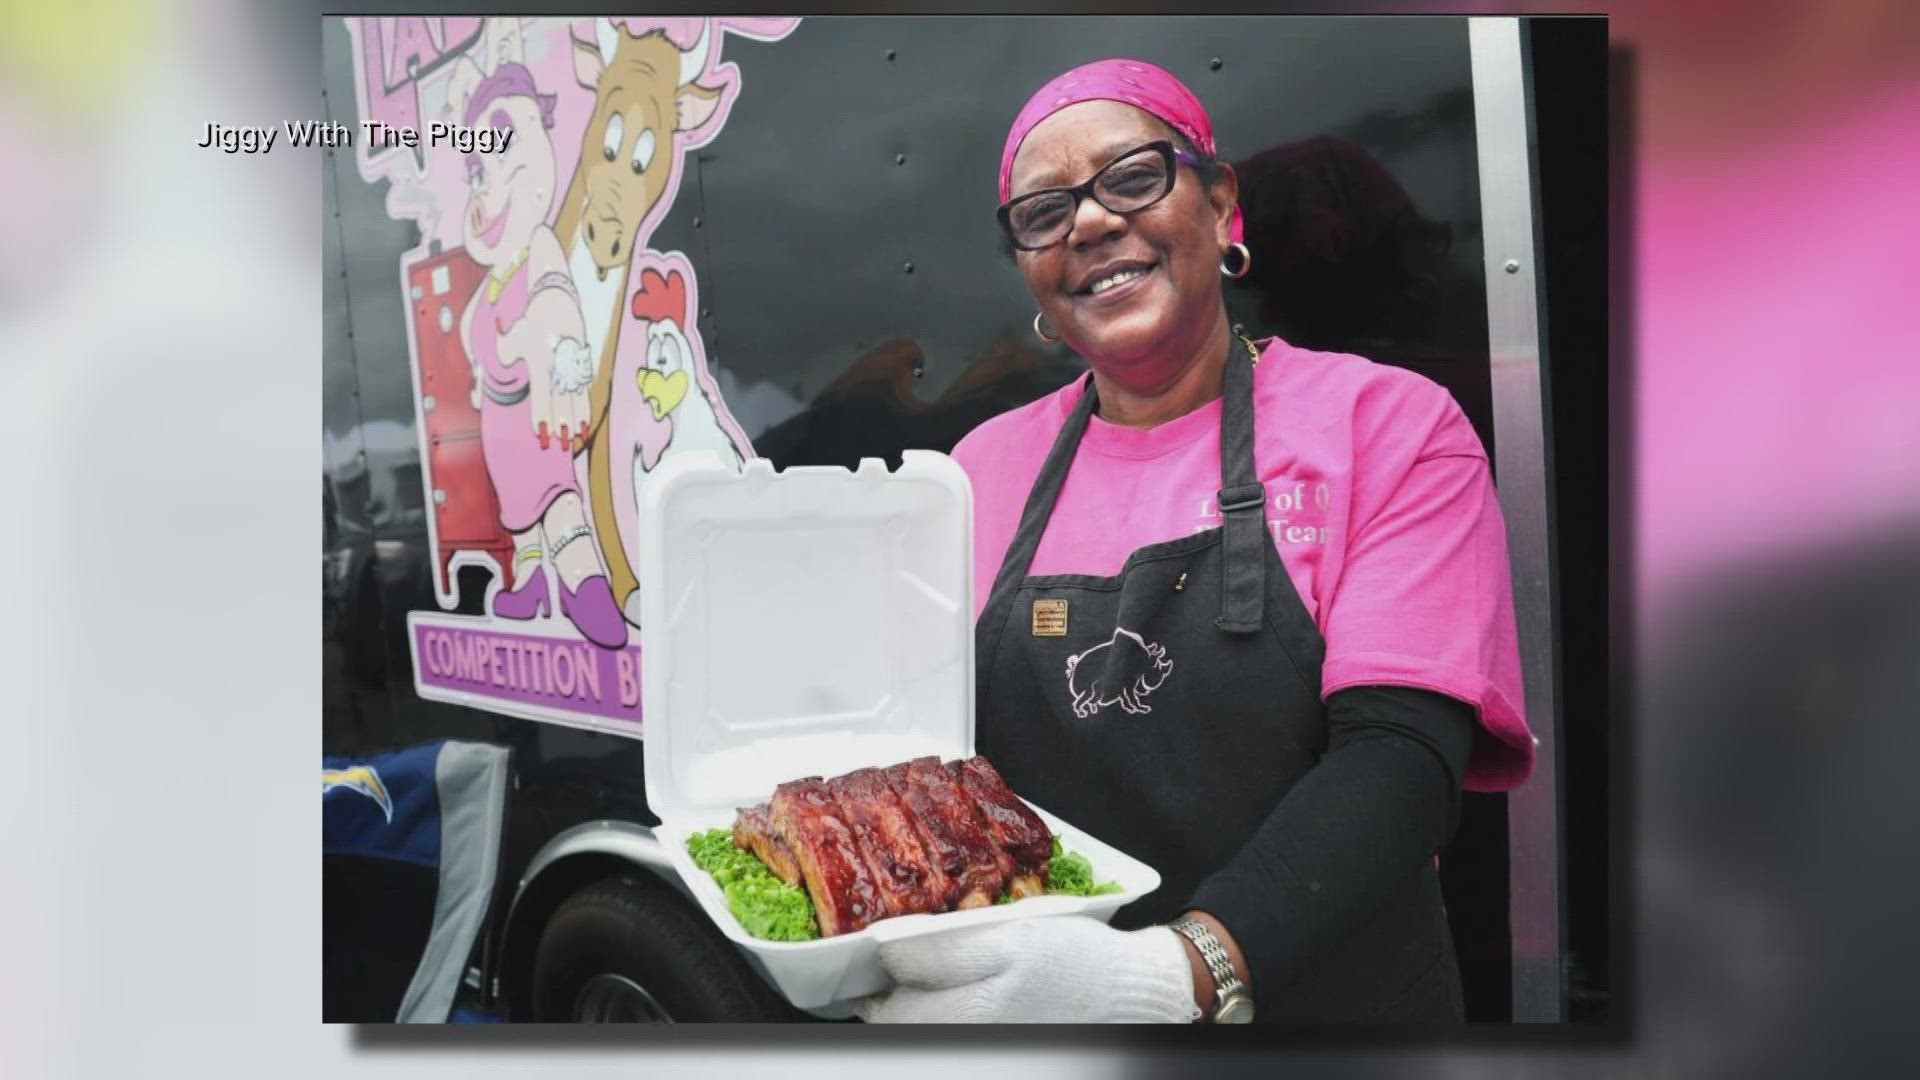 The annual Jiggy with the Piggy barbecue festival kicks off in Kannapolis this week, with big crowds and professional chefs competing to win best overall.